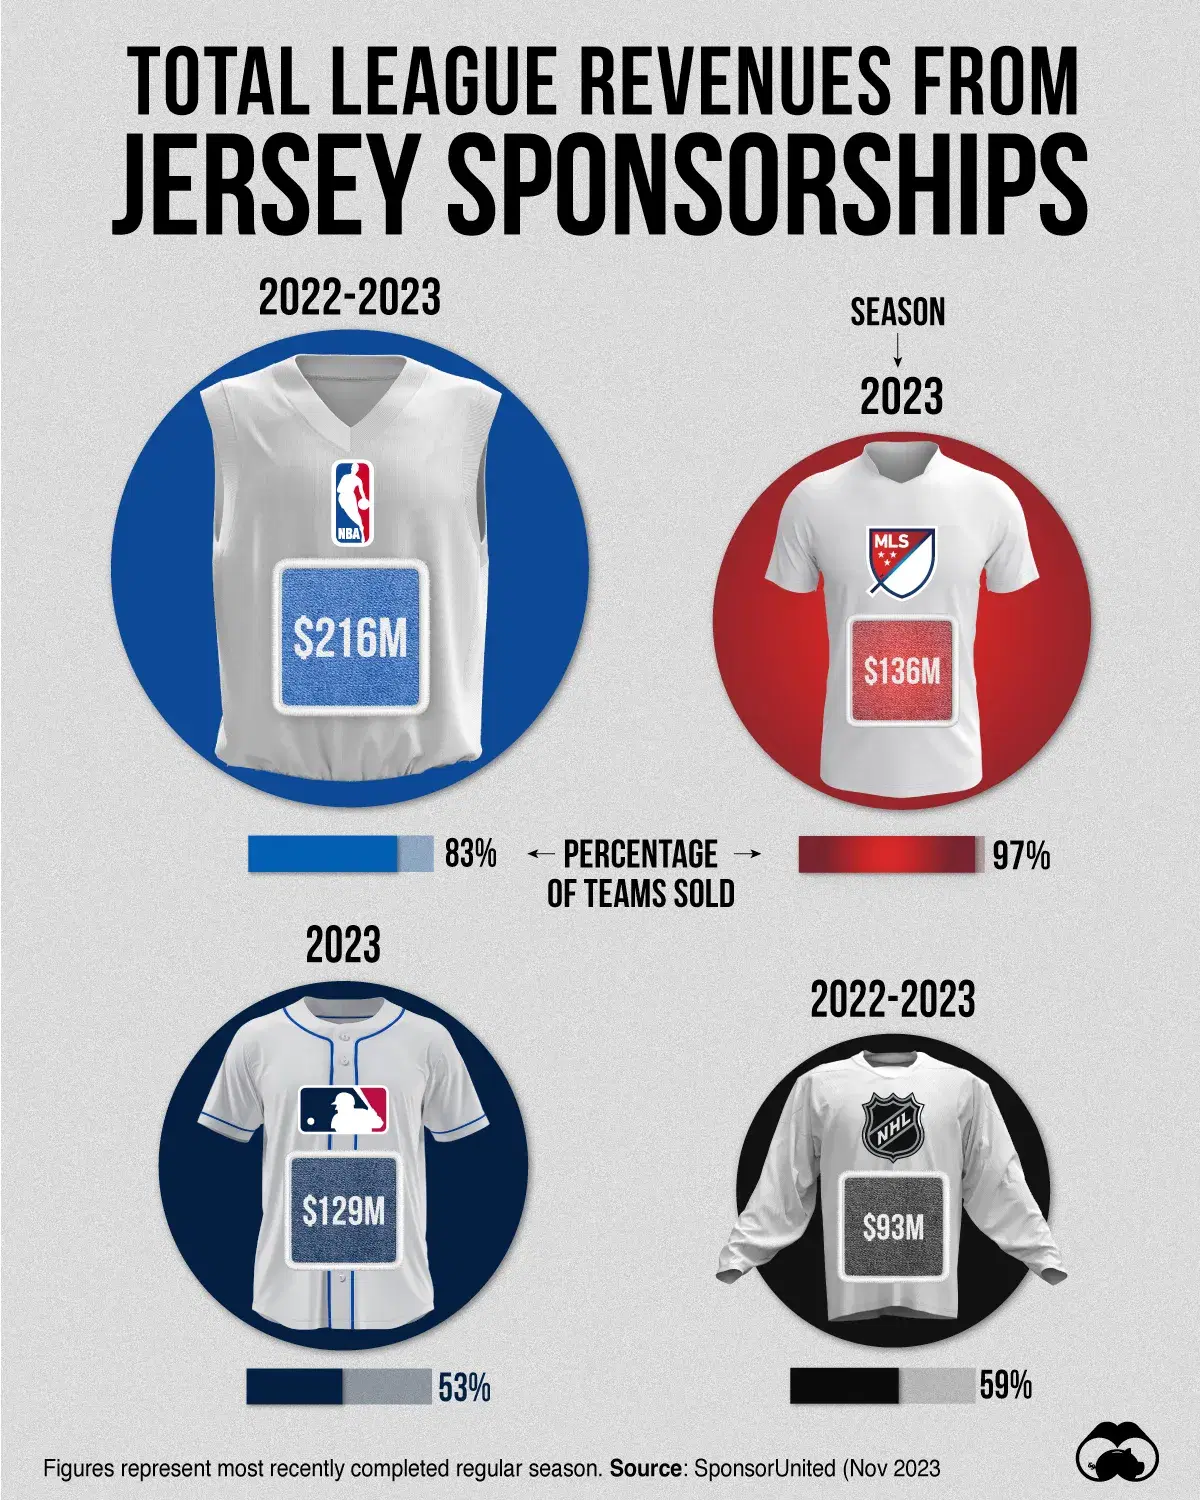 U.S. Sports Leagues Generated $574M in Revenue From Jersey Sponsorships